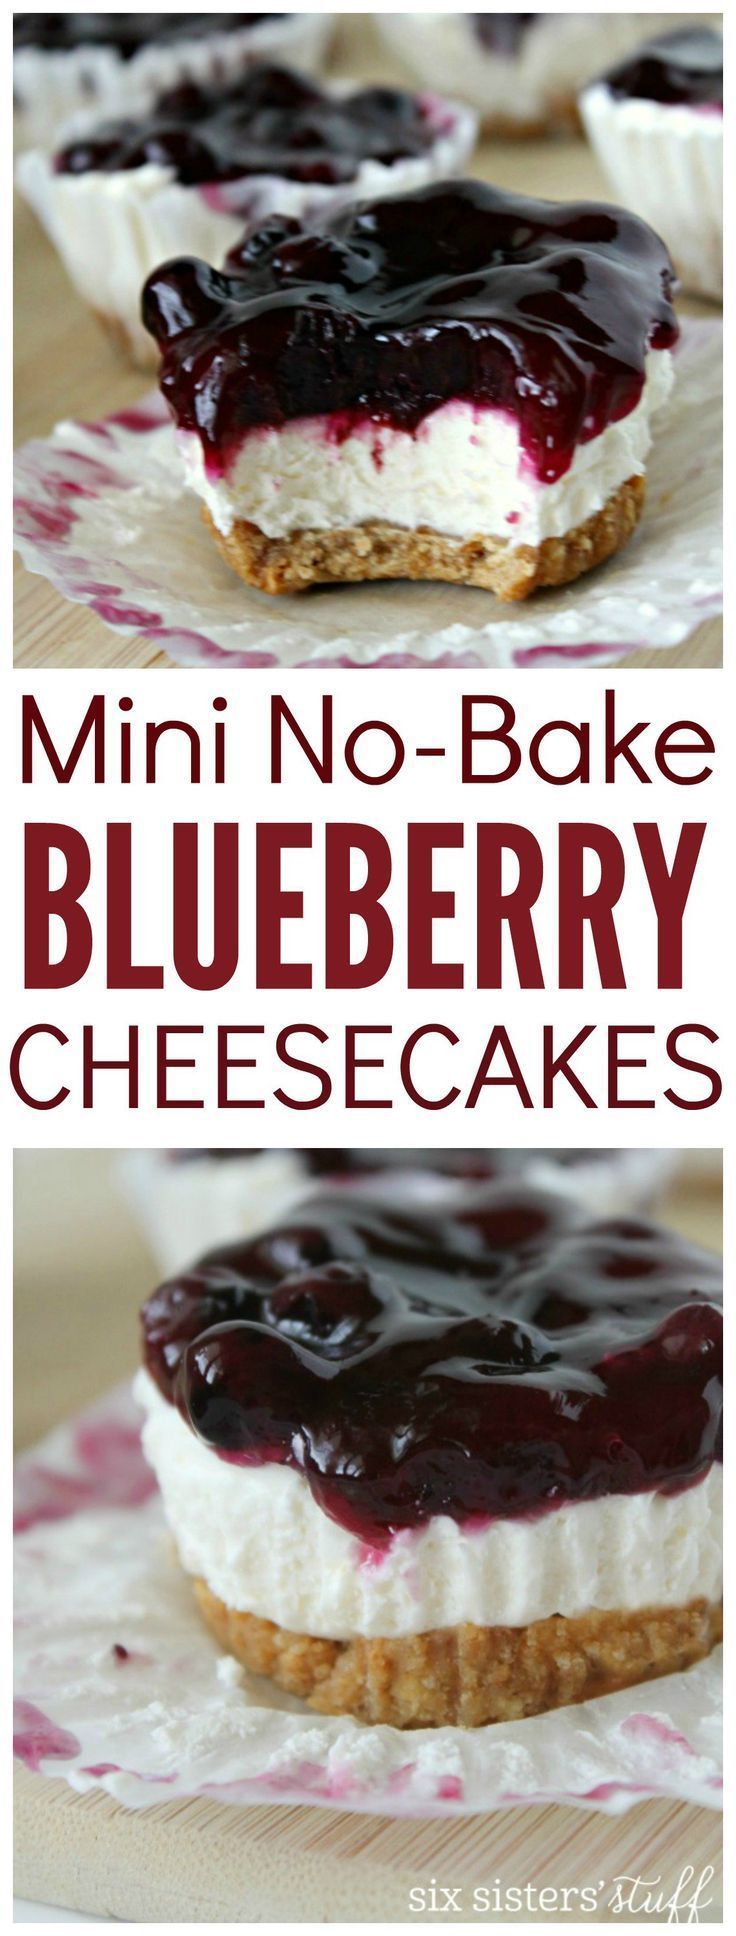 Mini No Bake Blueberry Cheesecakes from SixSistersStuff.com | Best Dessert Recipes | Cheesecake Recipe | Party Food | Easter